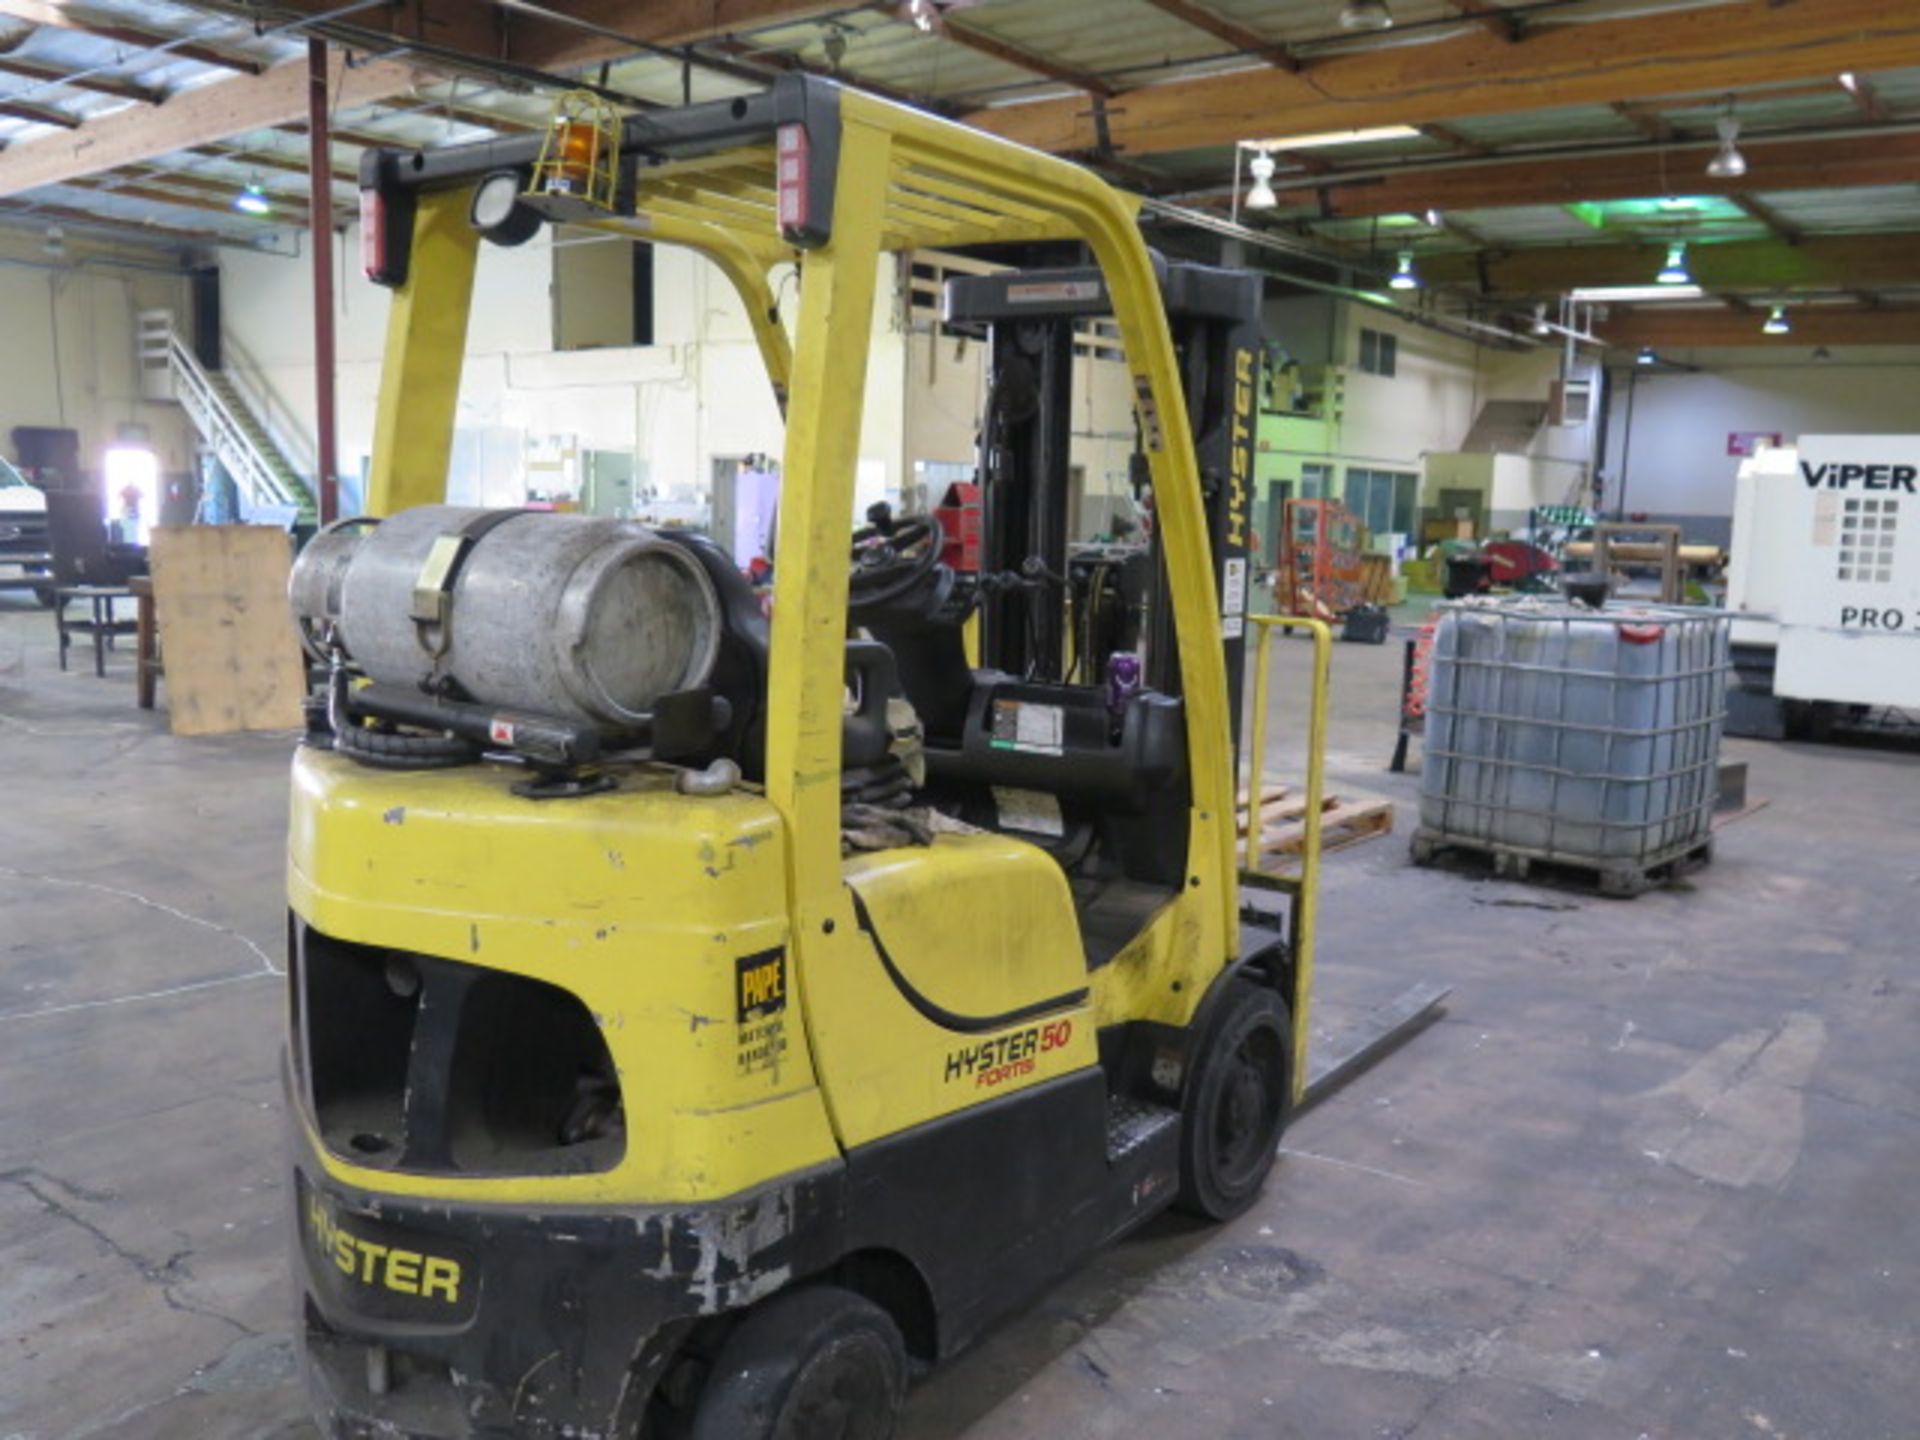 Hyster Fortis S50FT 5000 Lb Cap LPG Forklift s/n H187V07907R w/ Keyless Start, 3-Stage, SOLD AS IS - Image 4 of 15